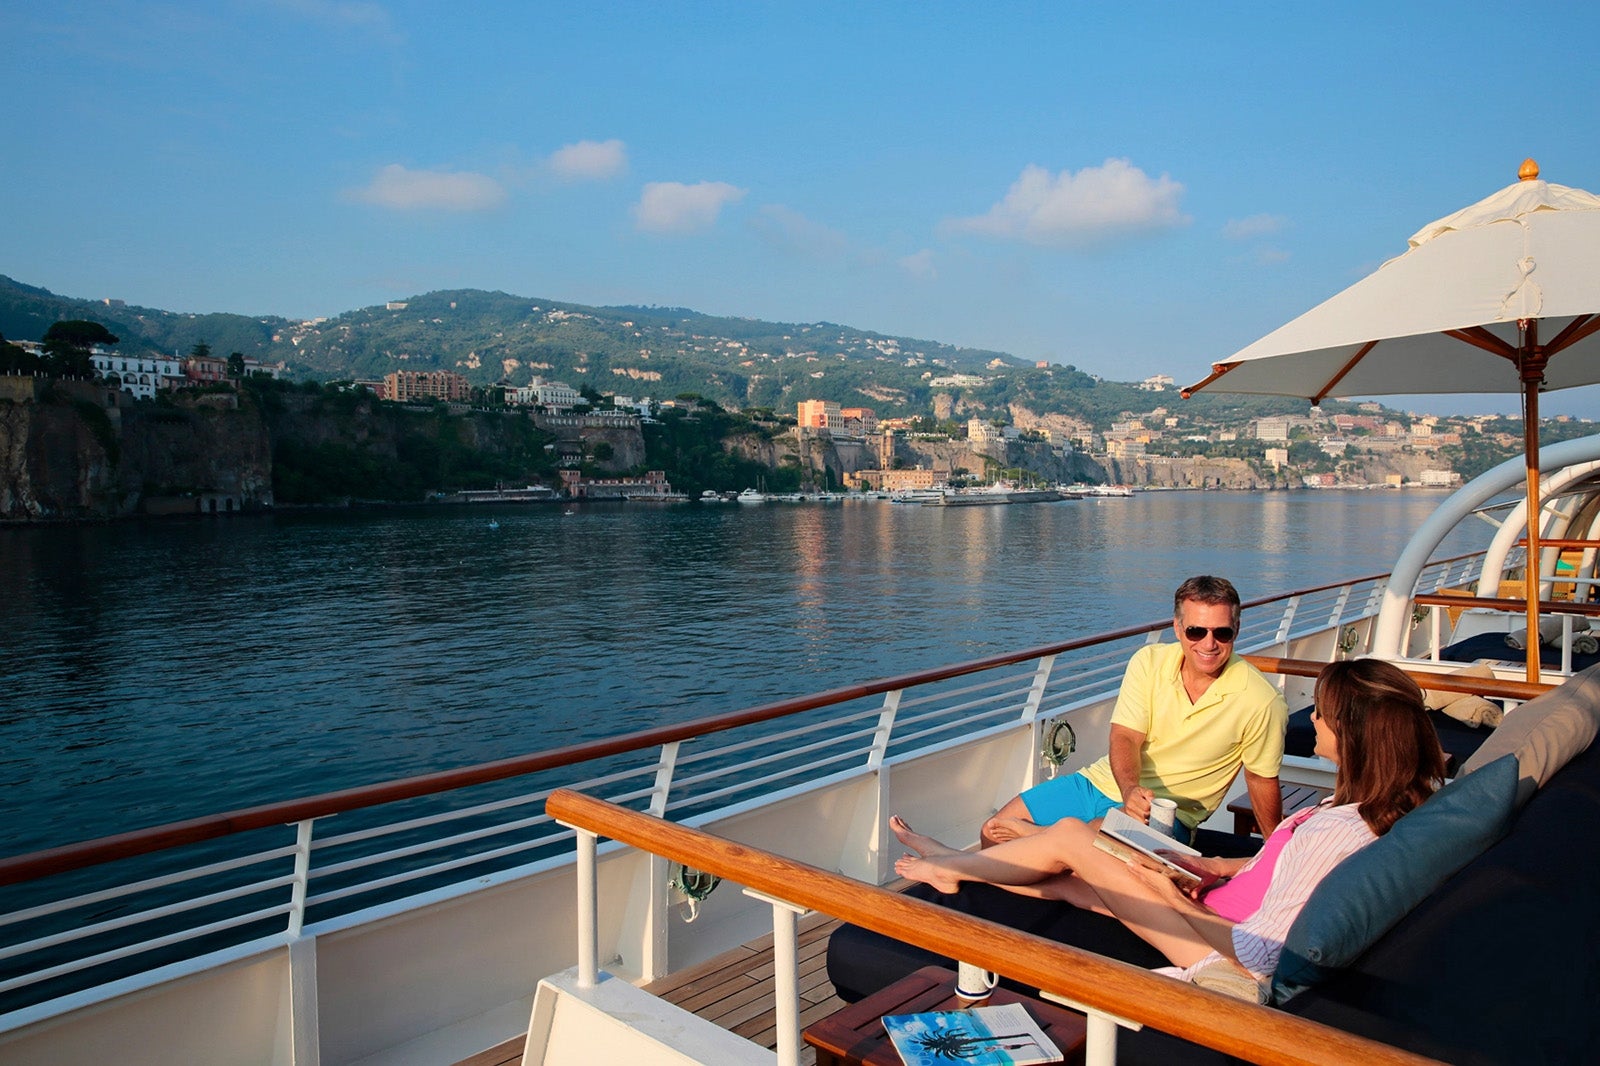 most luxurious cruise in india